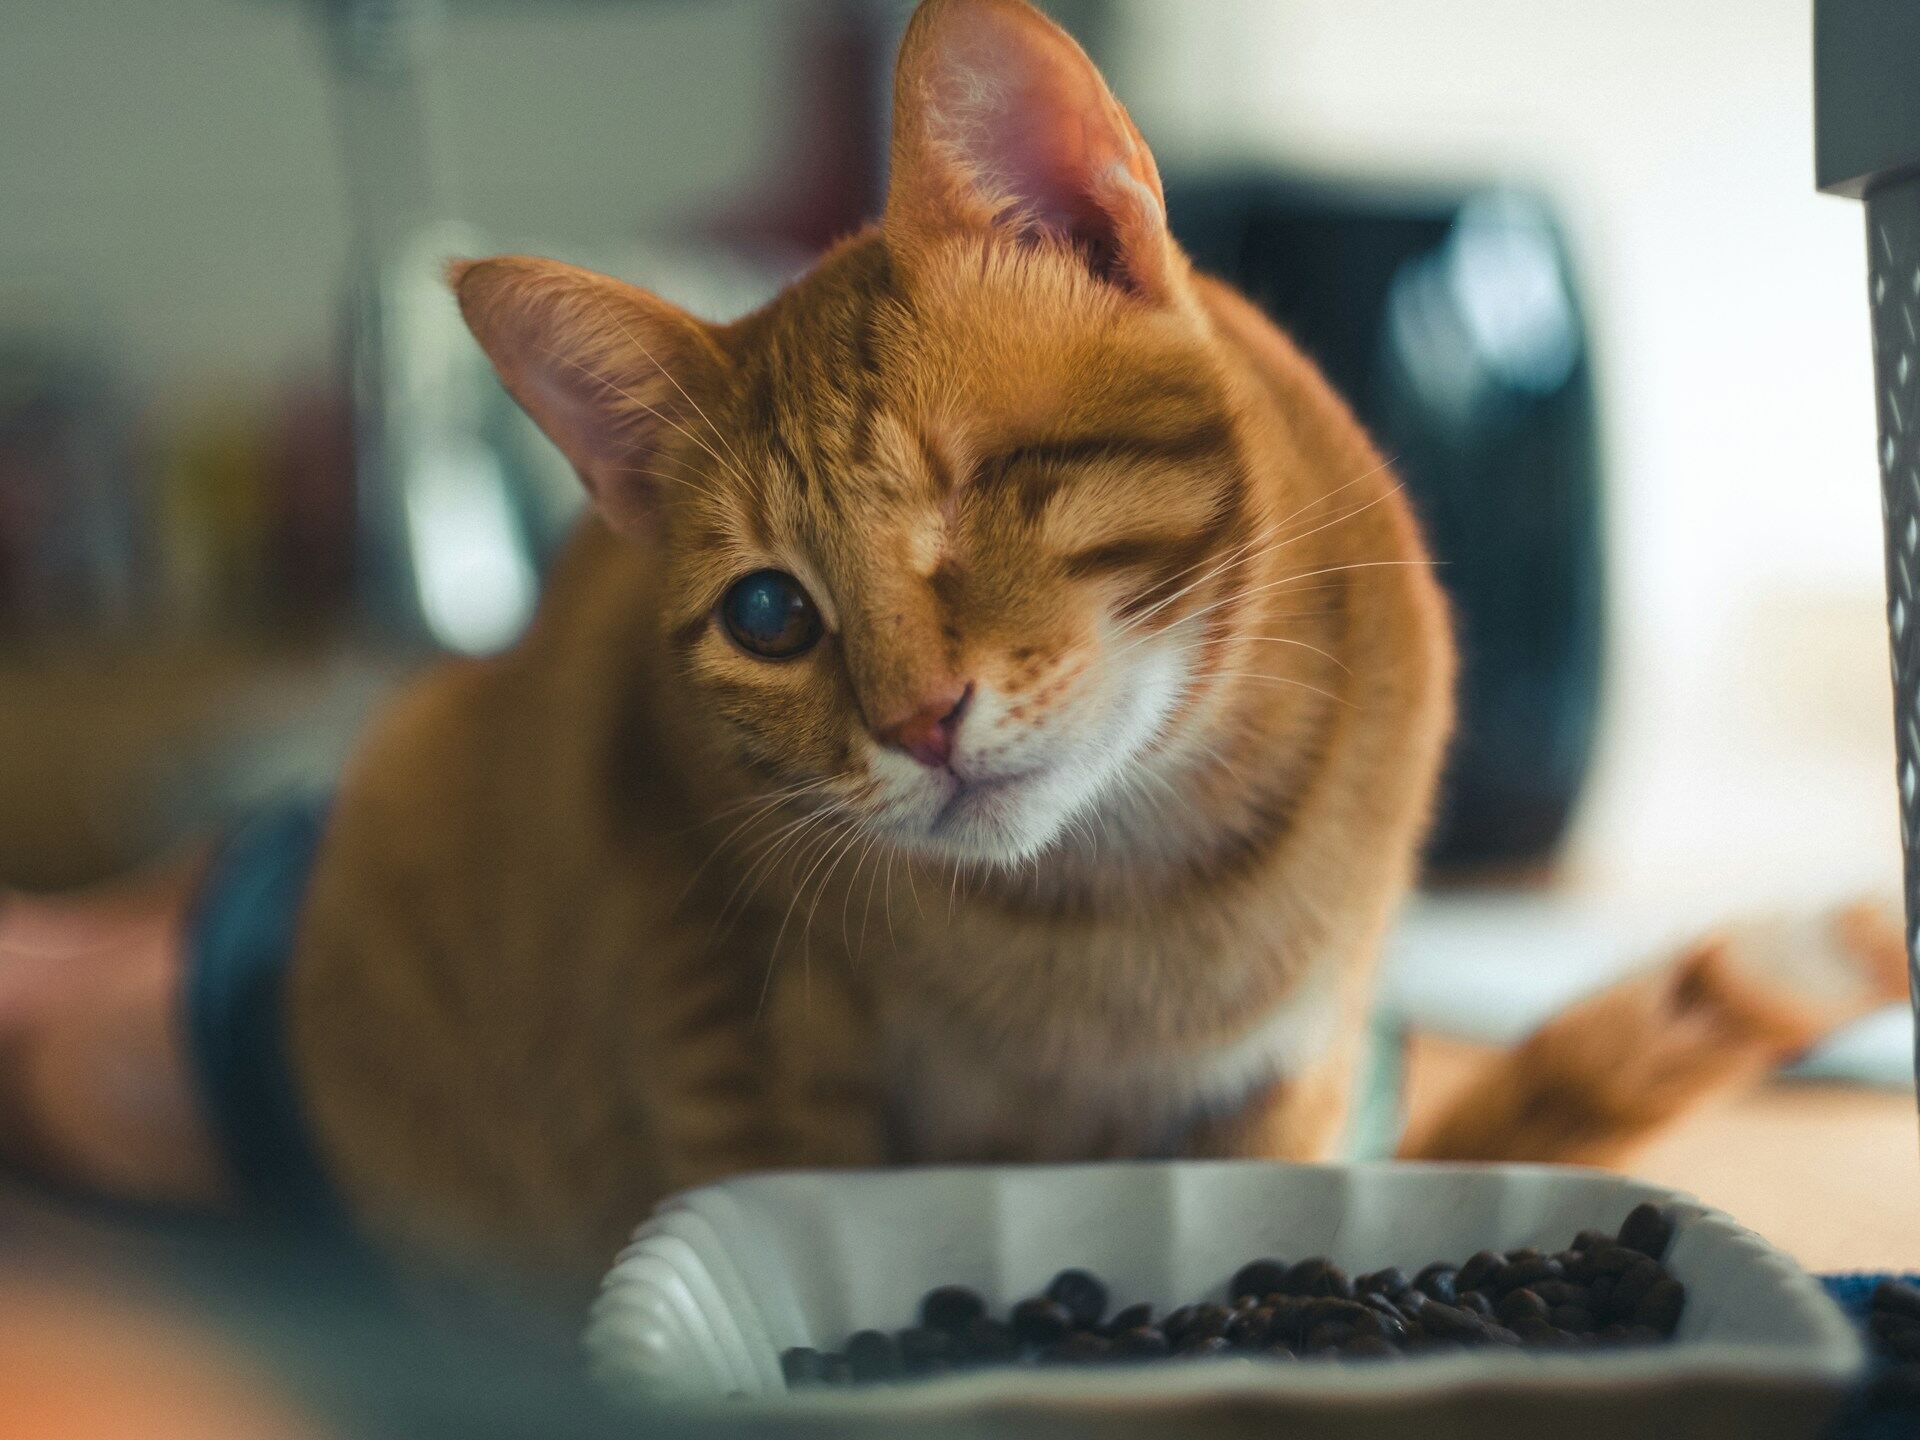 A one-eyed cat eating from a food bowl